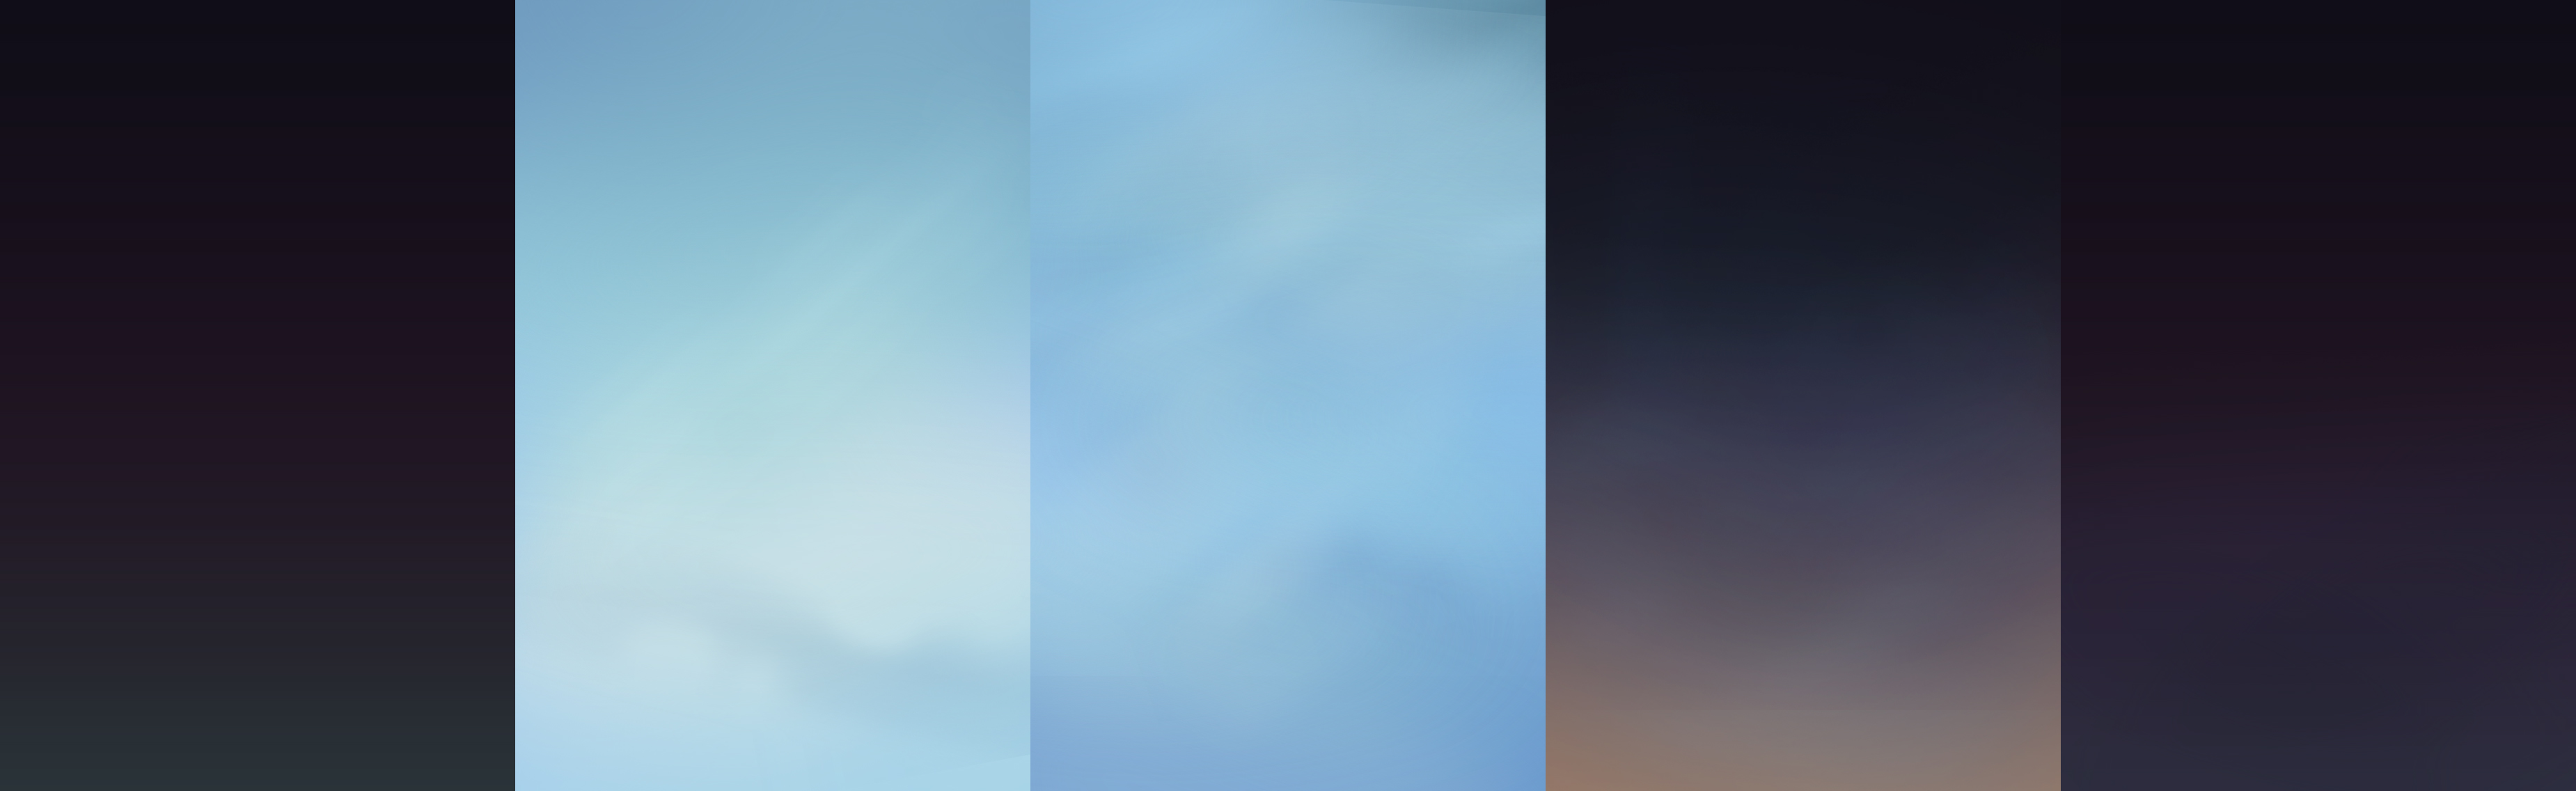 iOS 7 iPhone Backgrounds PSD